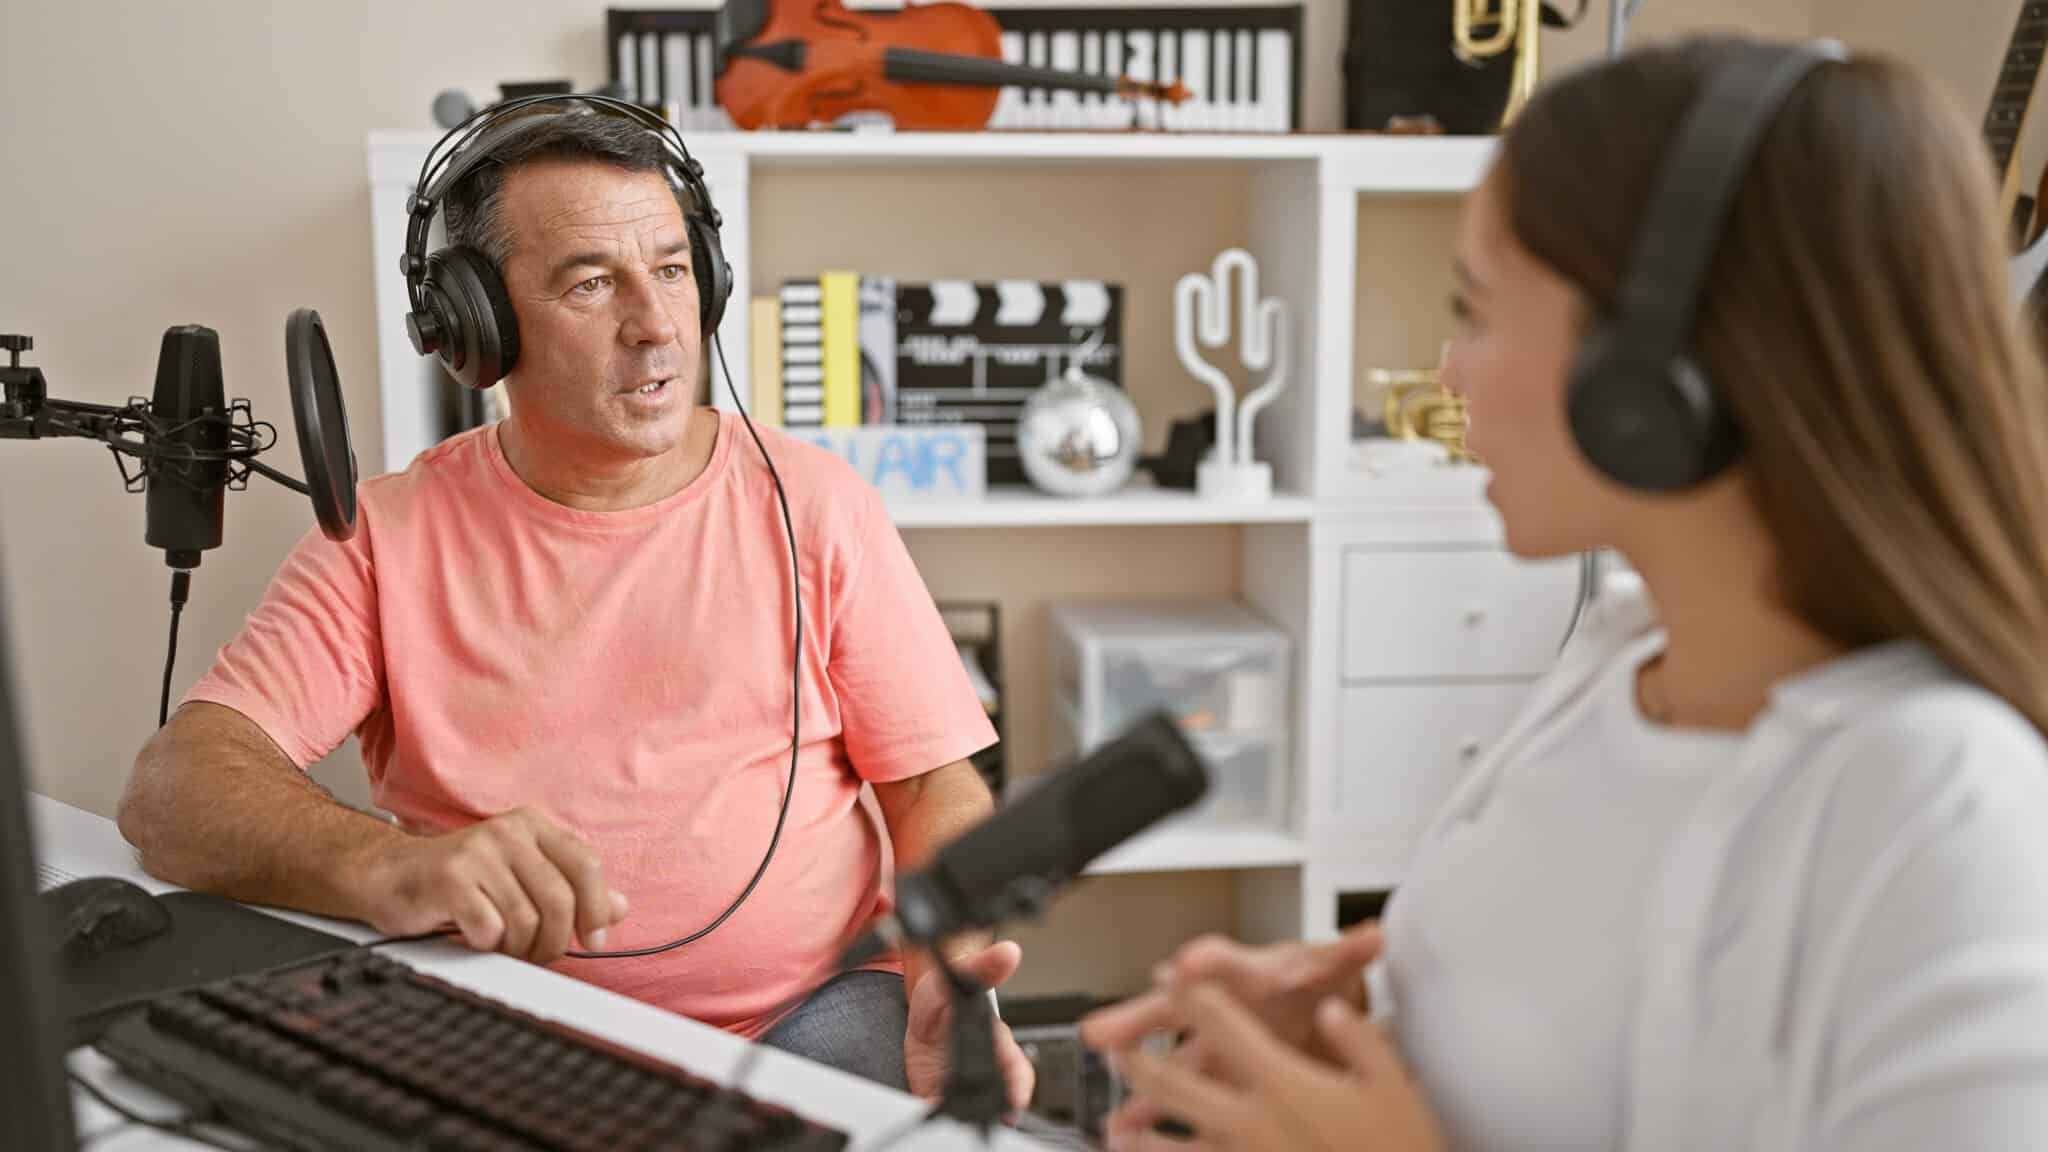 Podcaster speaks with celebrity guest, showcasing the crucial role of precise transcription services.